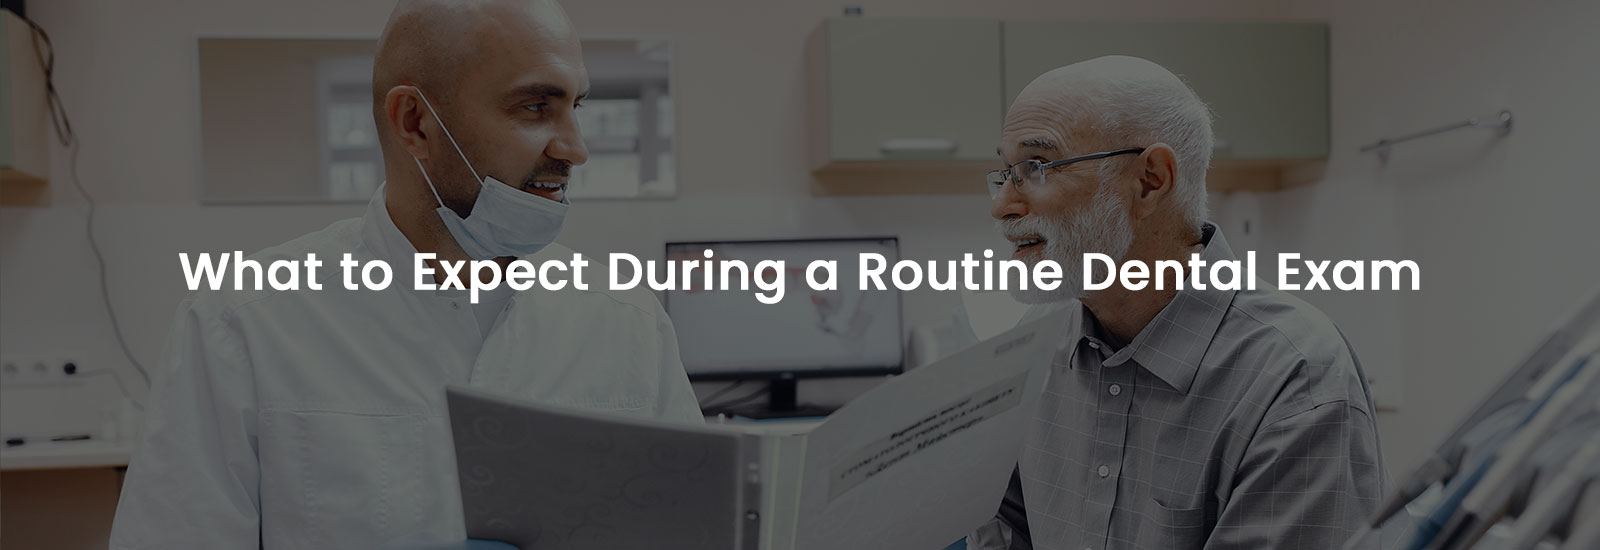 What to Expect During a Routine Dental Exam | Banner Image